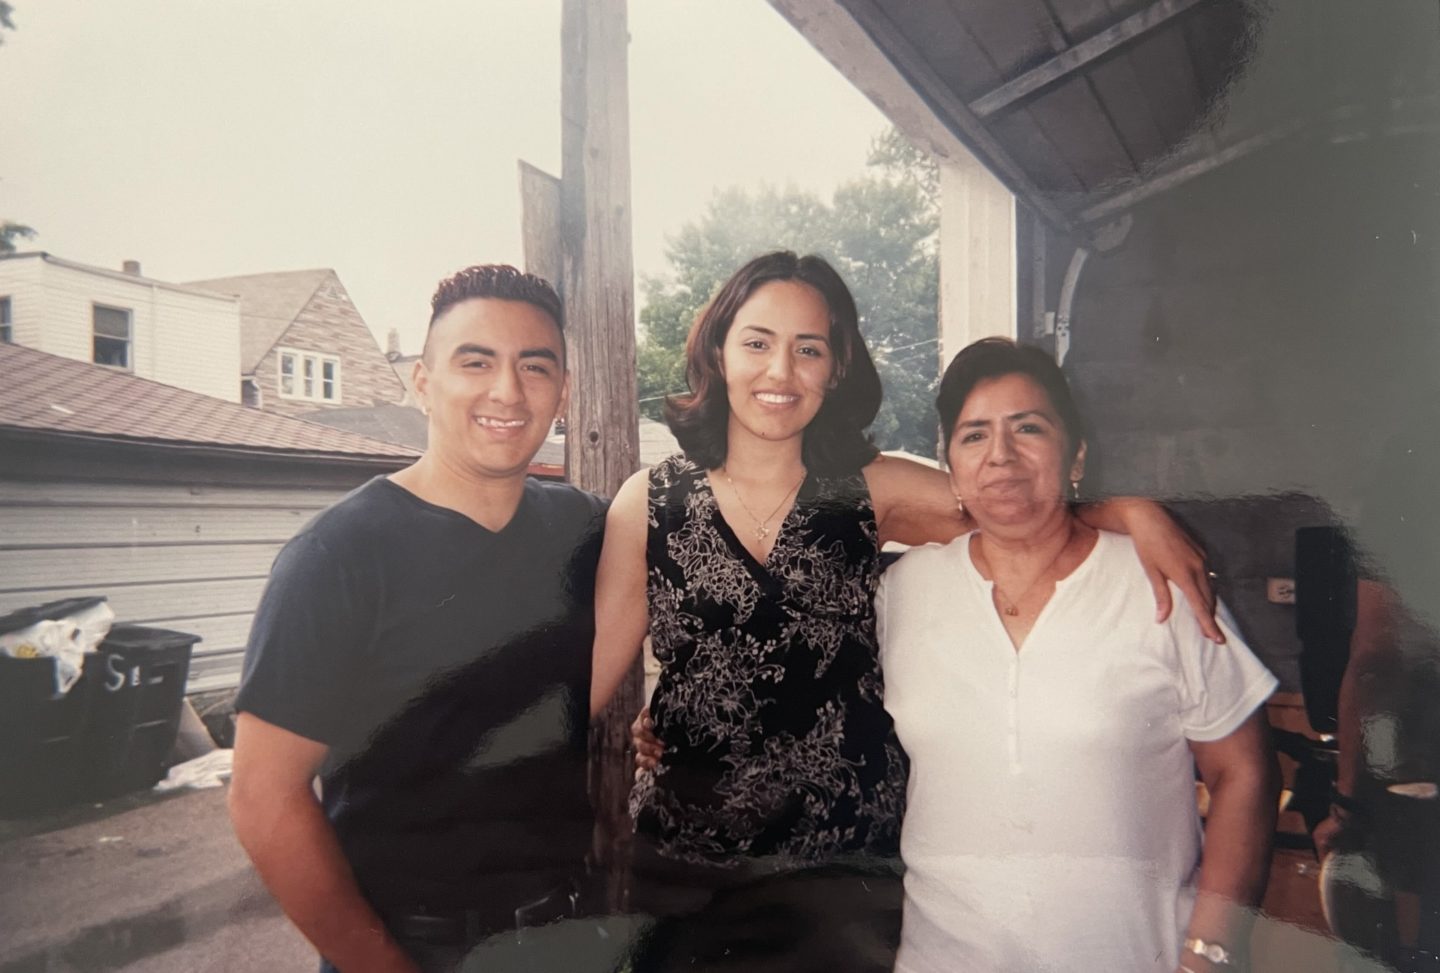 The author's family from left to right: brother Gilberto, sister Eliut and mother Elvira Limas.